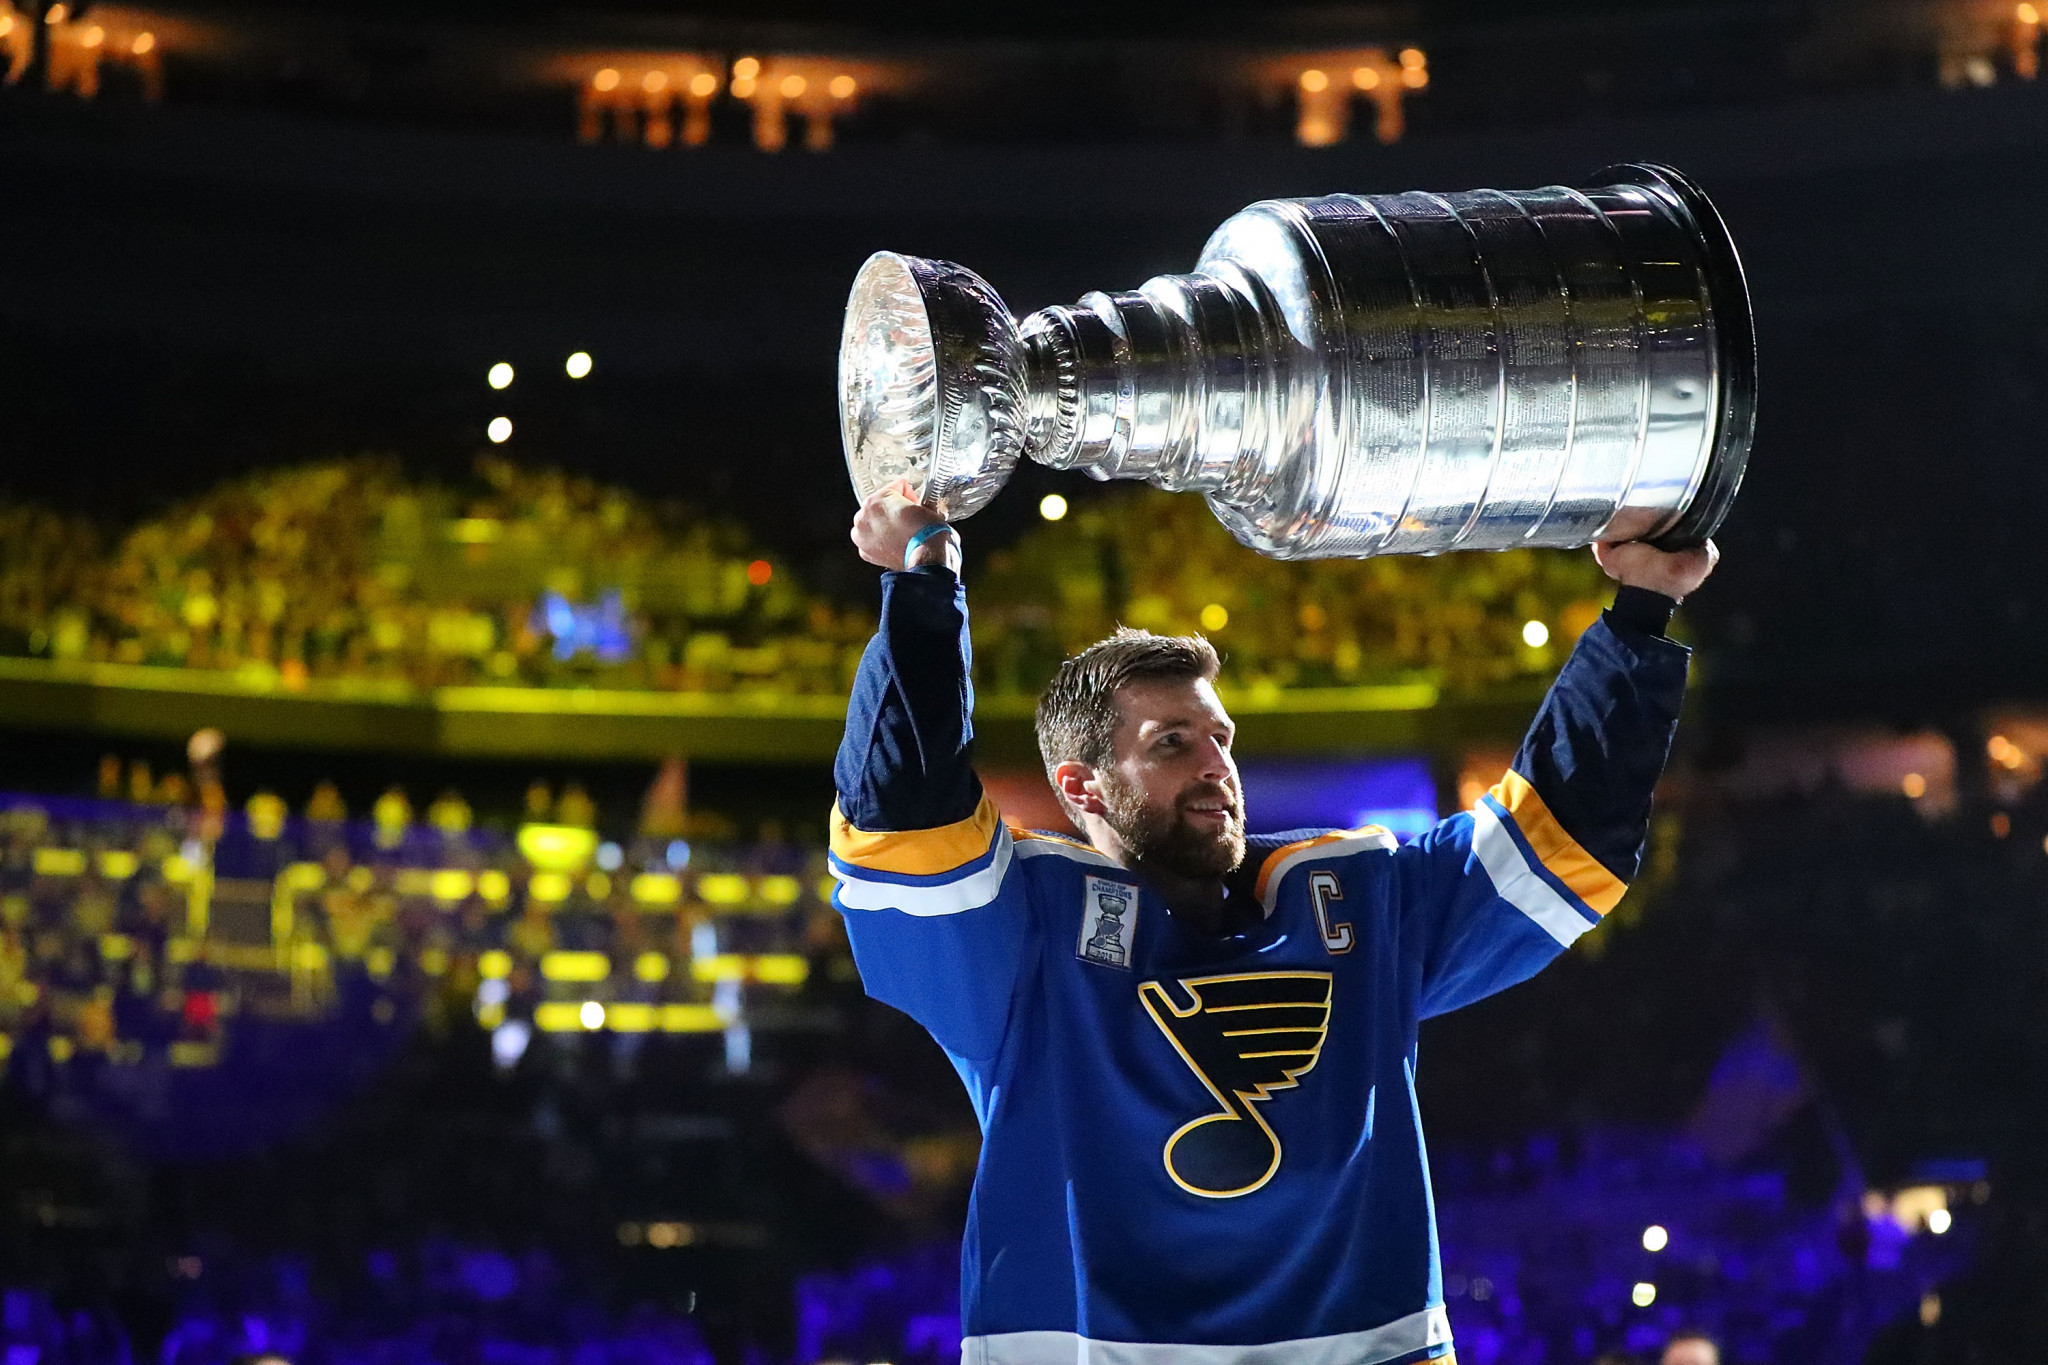 Alex Pietrangelo captained St Louis Blues to the Stanley Cup in 2019 ©Getty Images